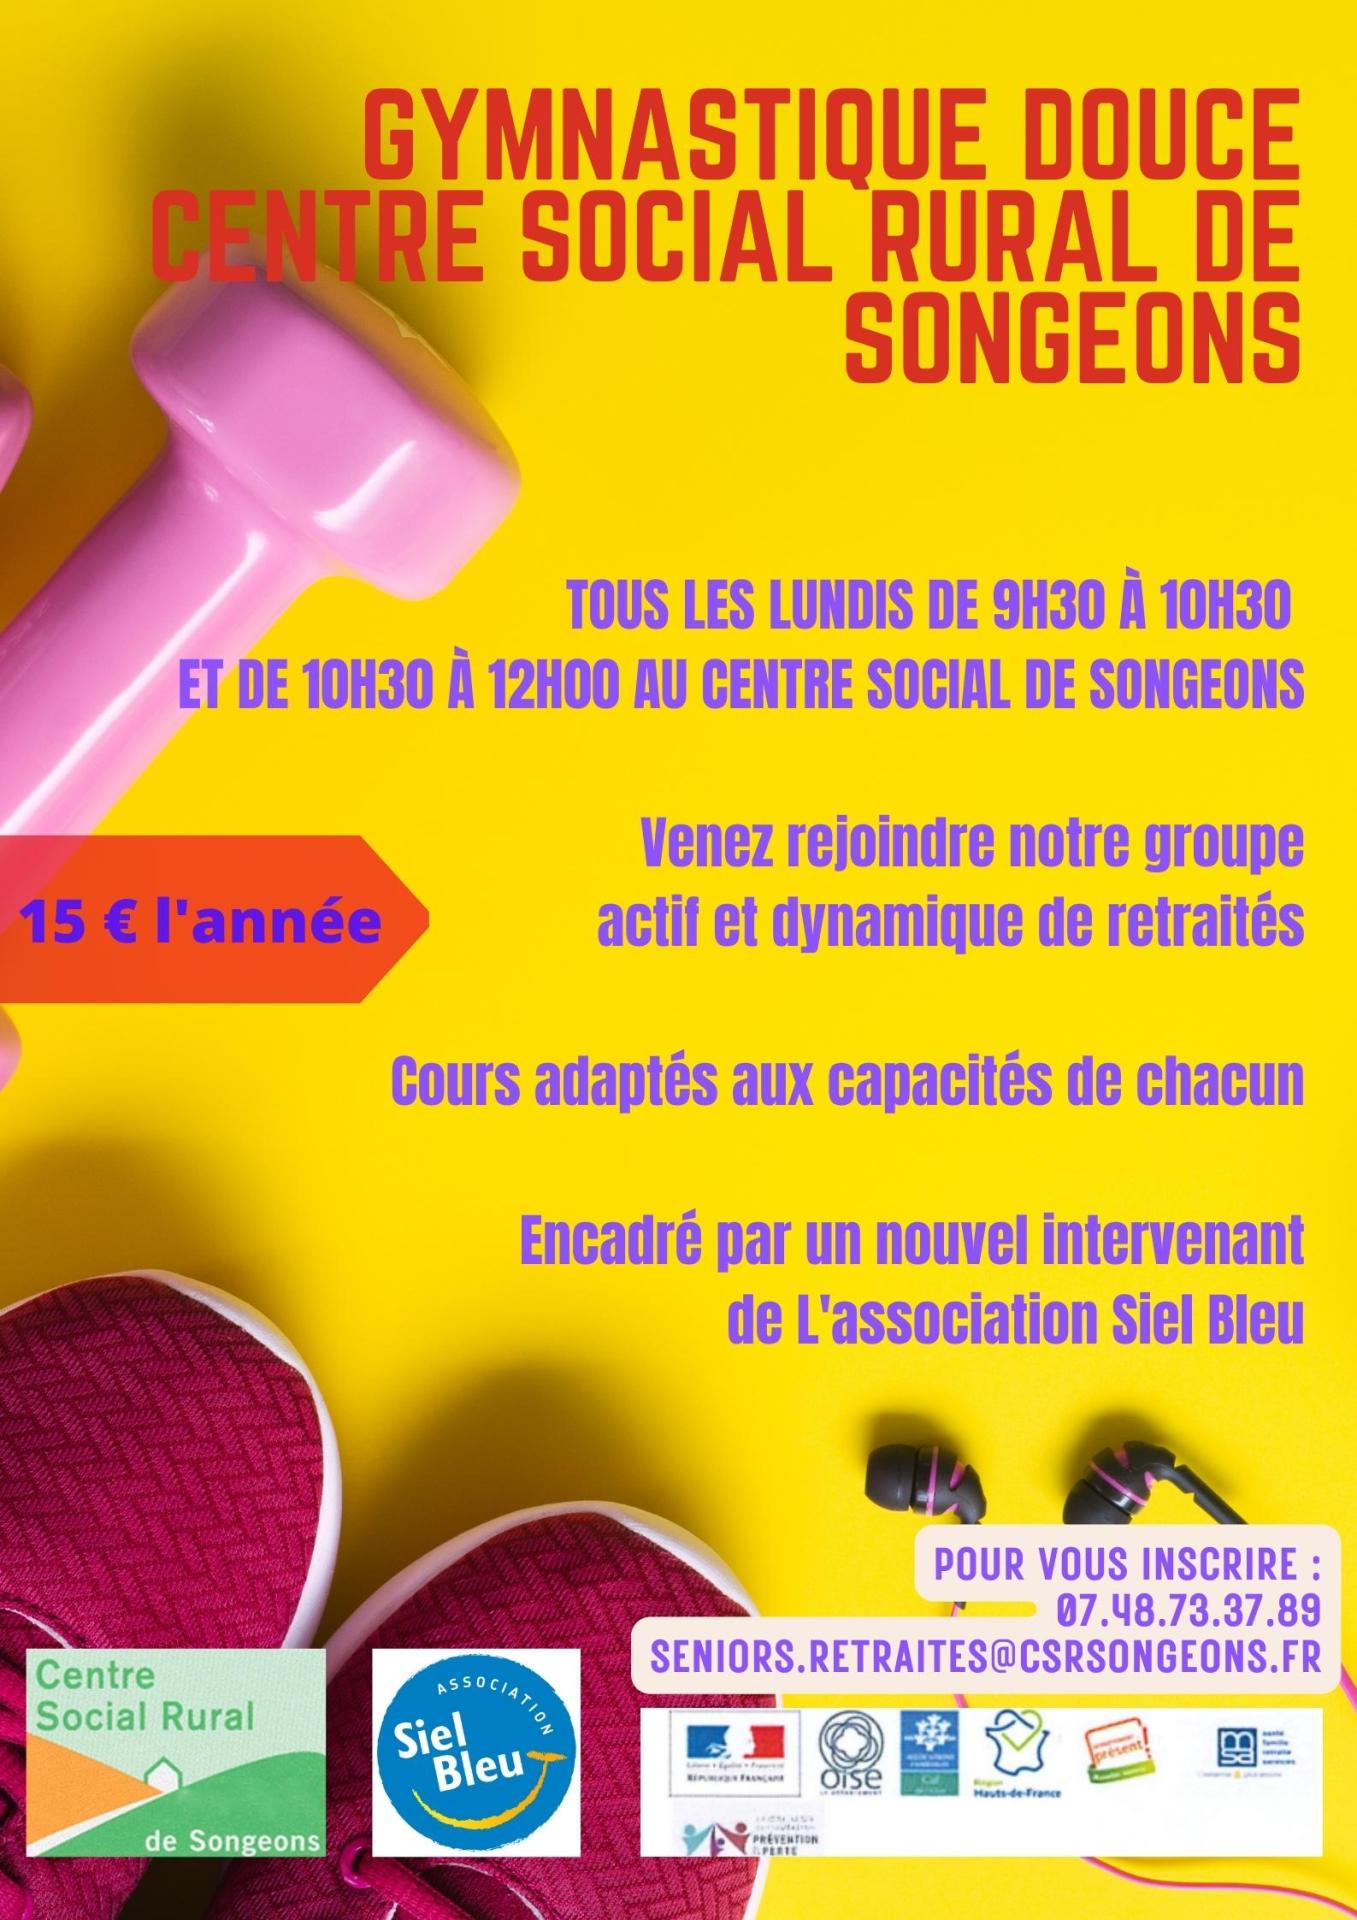 Affiche gym douce songeons 23 24